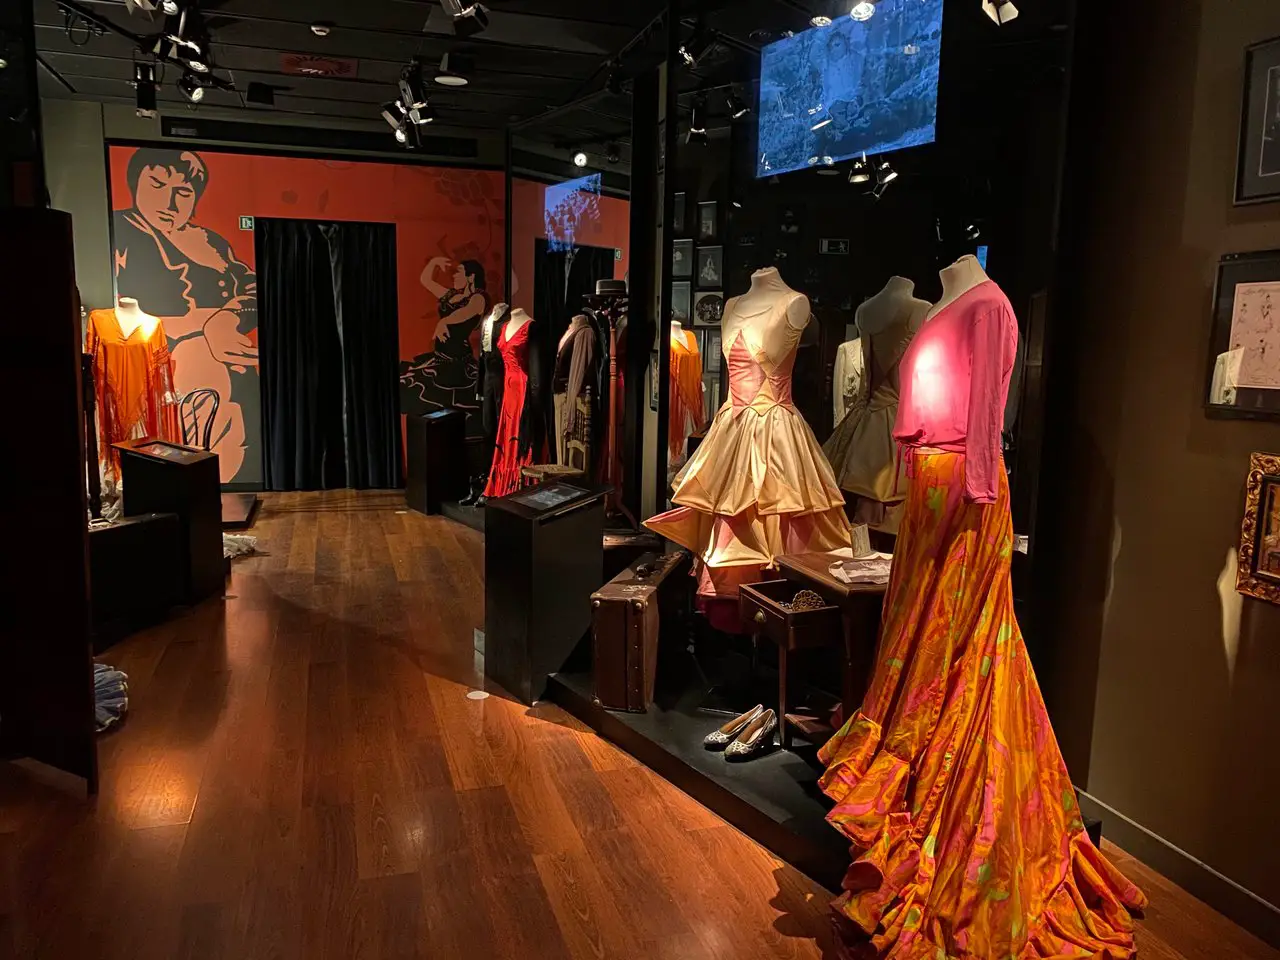 Interior of the Seville flamenco museum. There are three different flamenco dresses throughout history on display.